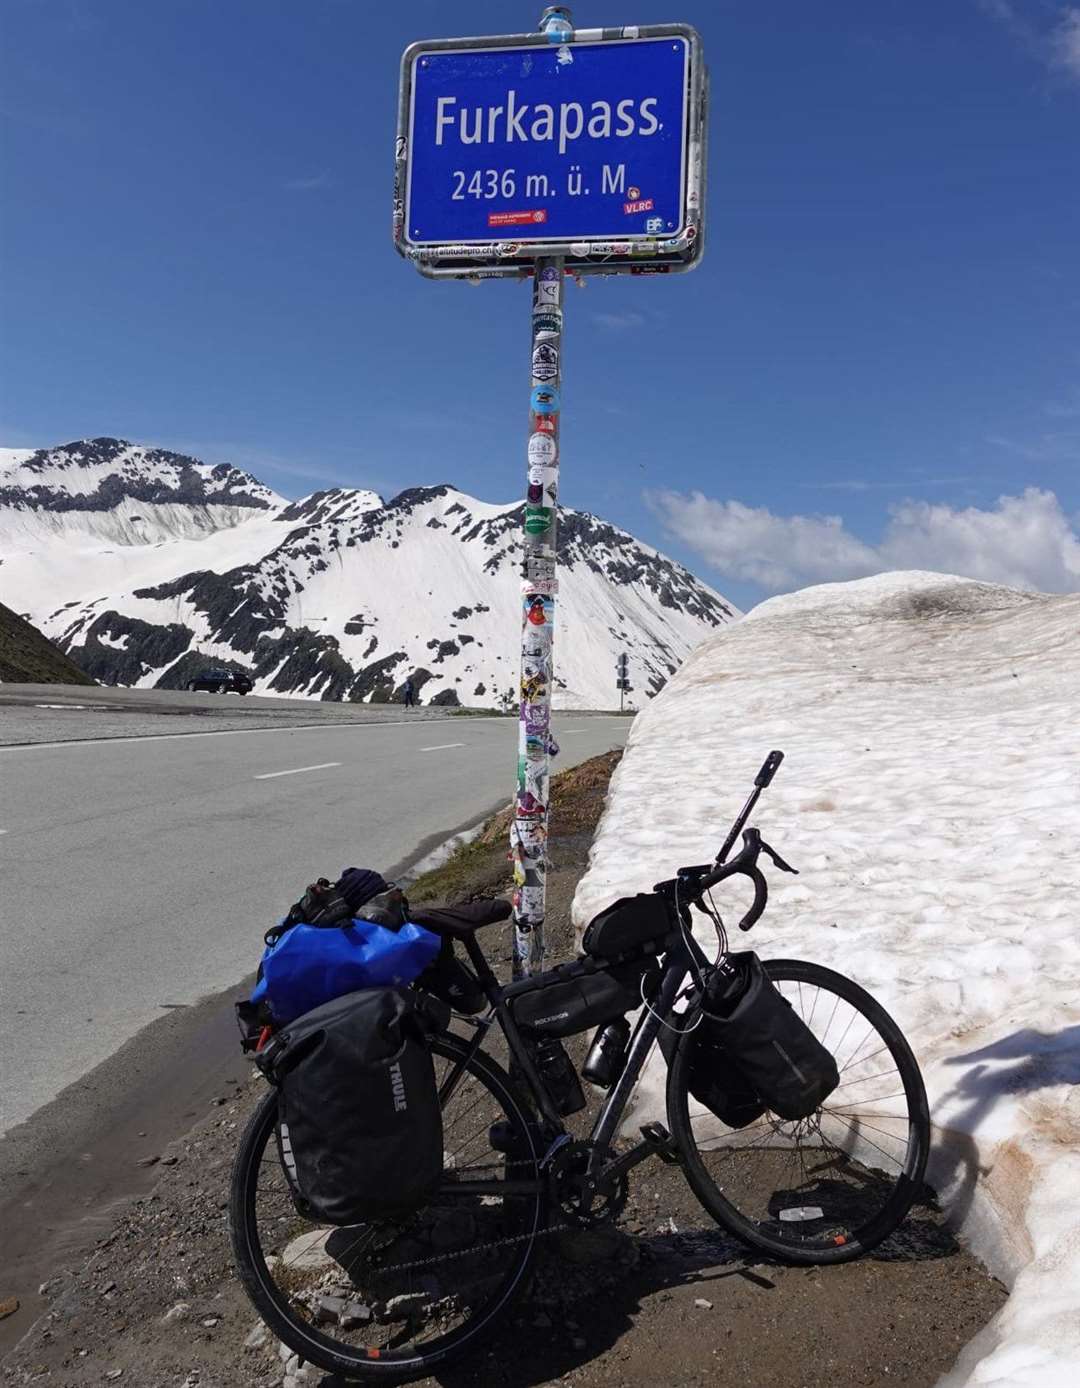 Sam has cycled through the Furka Pass in Switzerland. Picture: SWNS